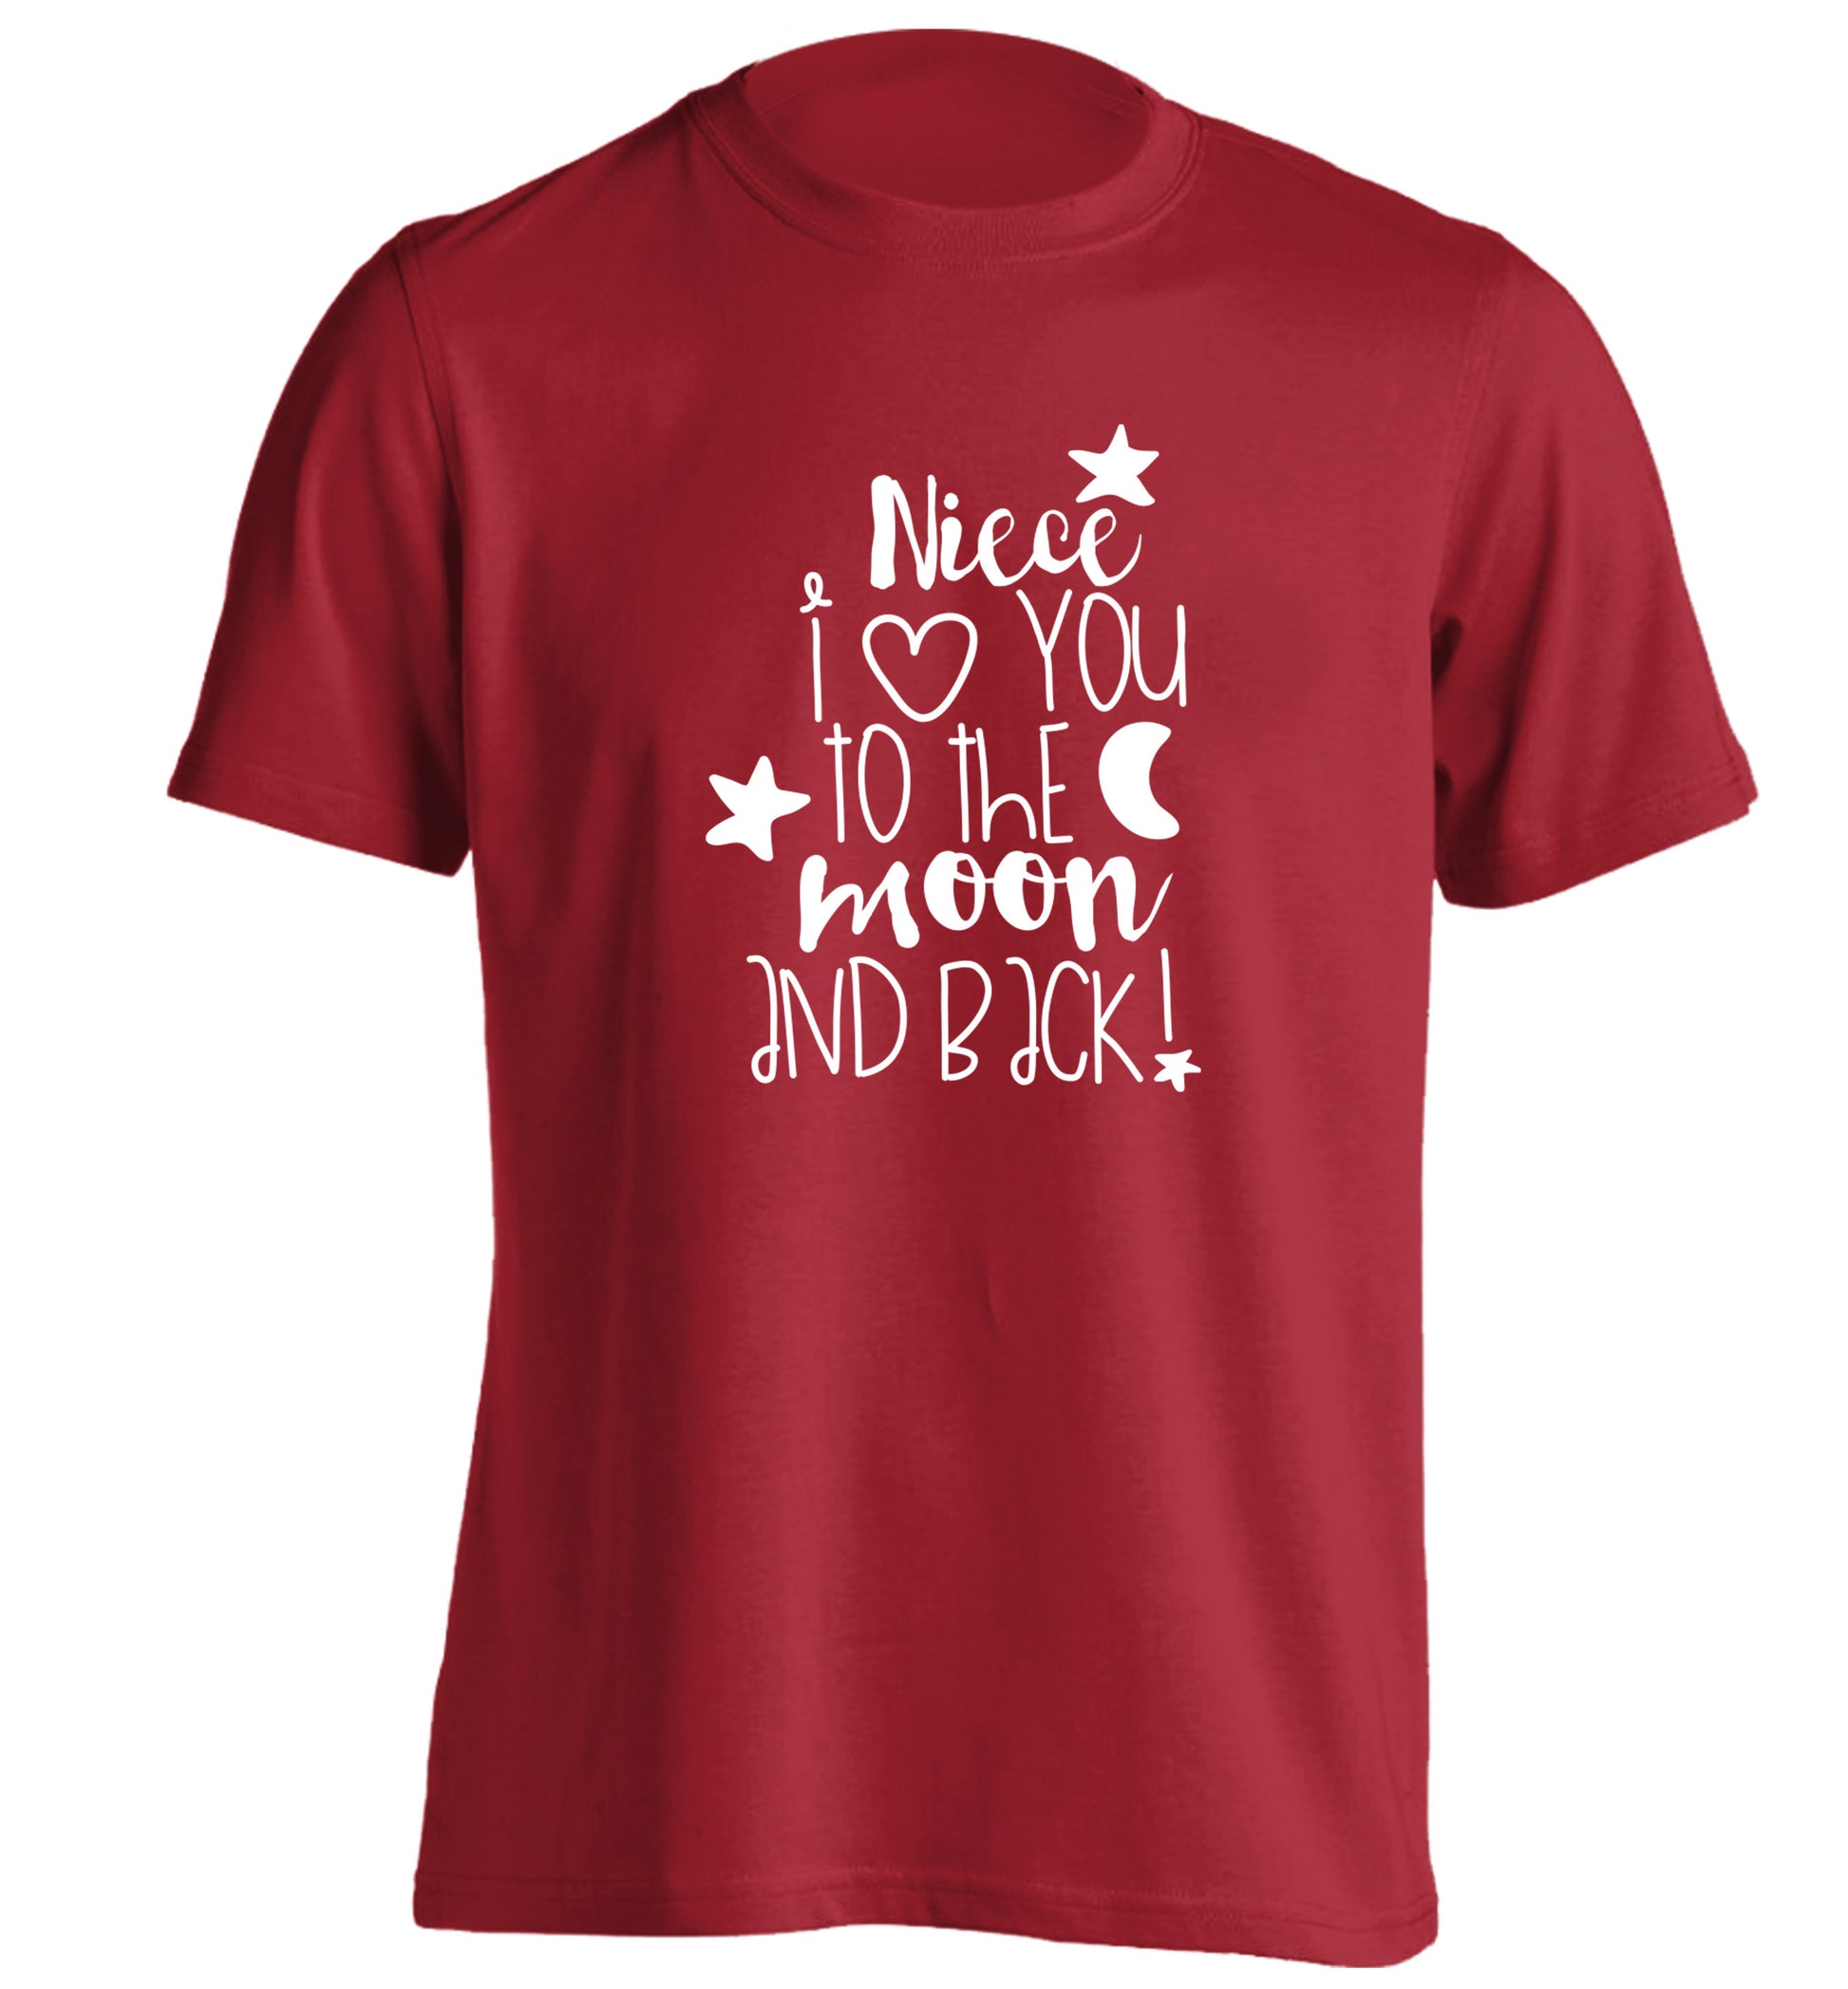 Niece I love you to the moon and back adults unisex red Tshirt 2XL